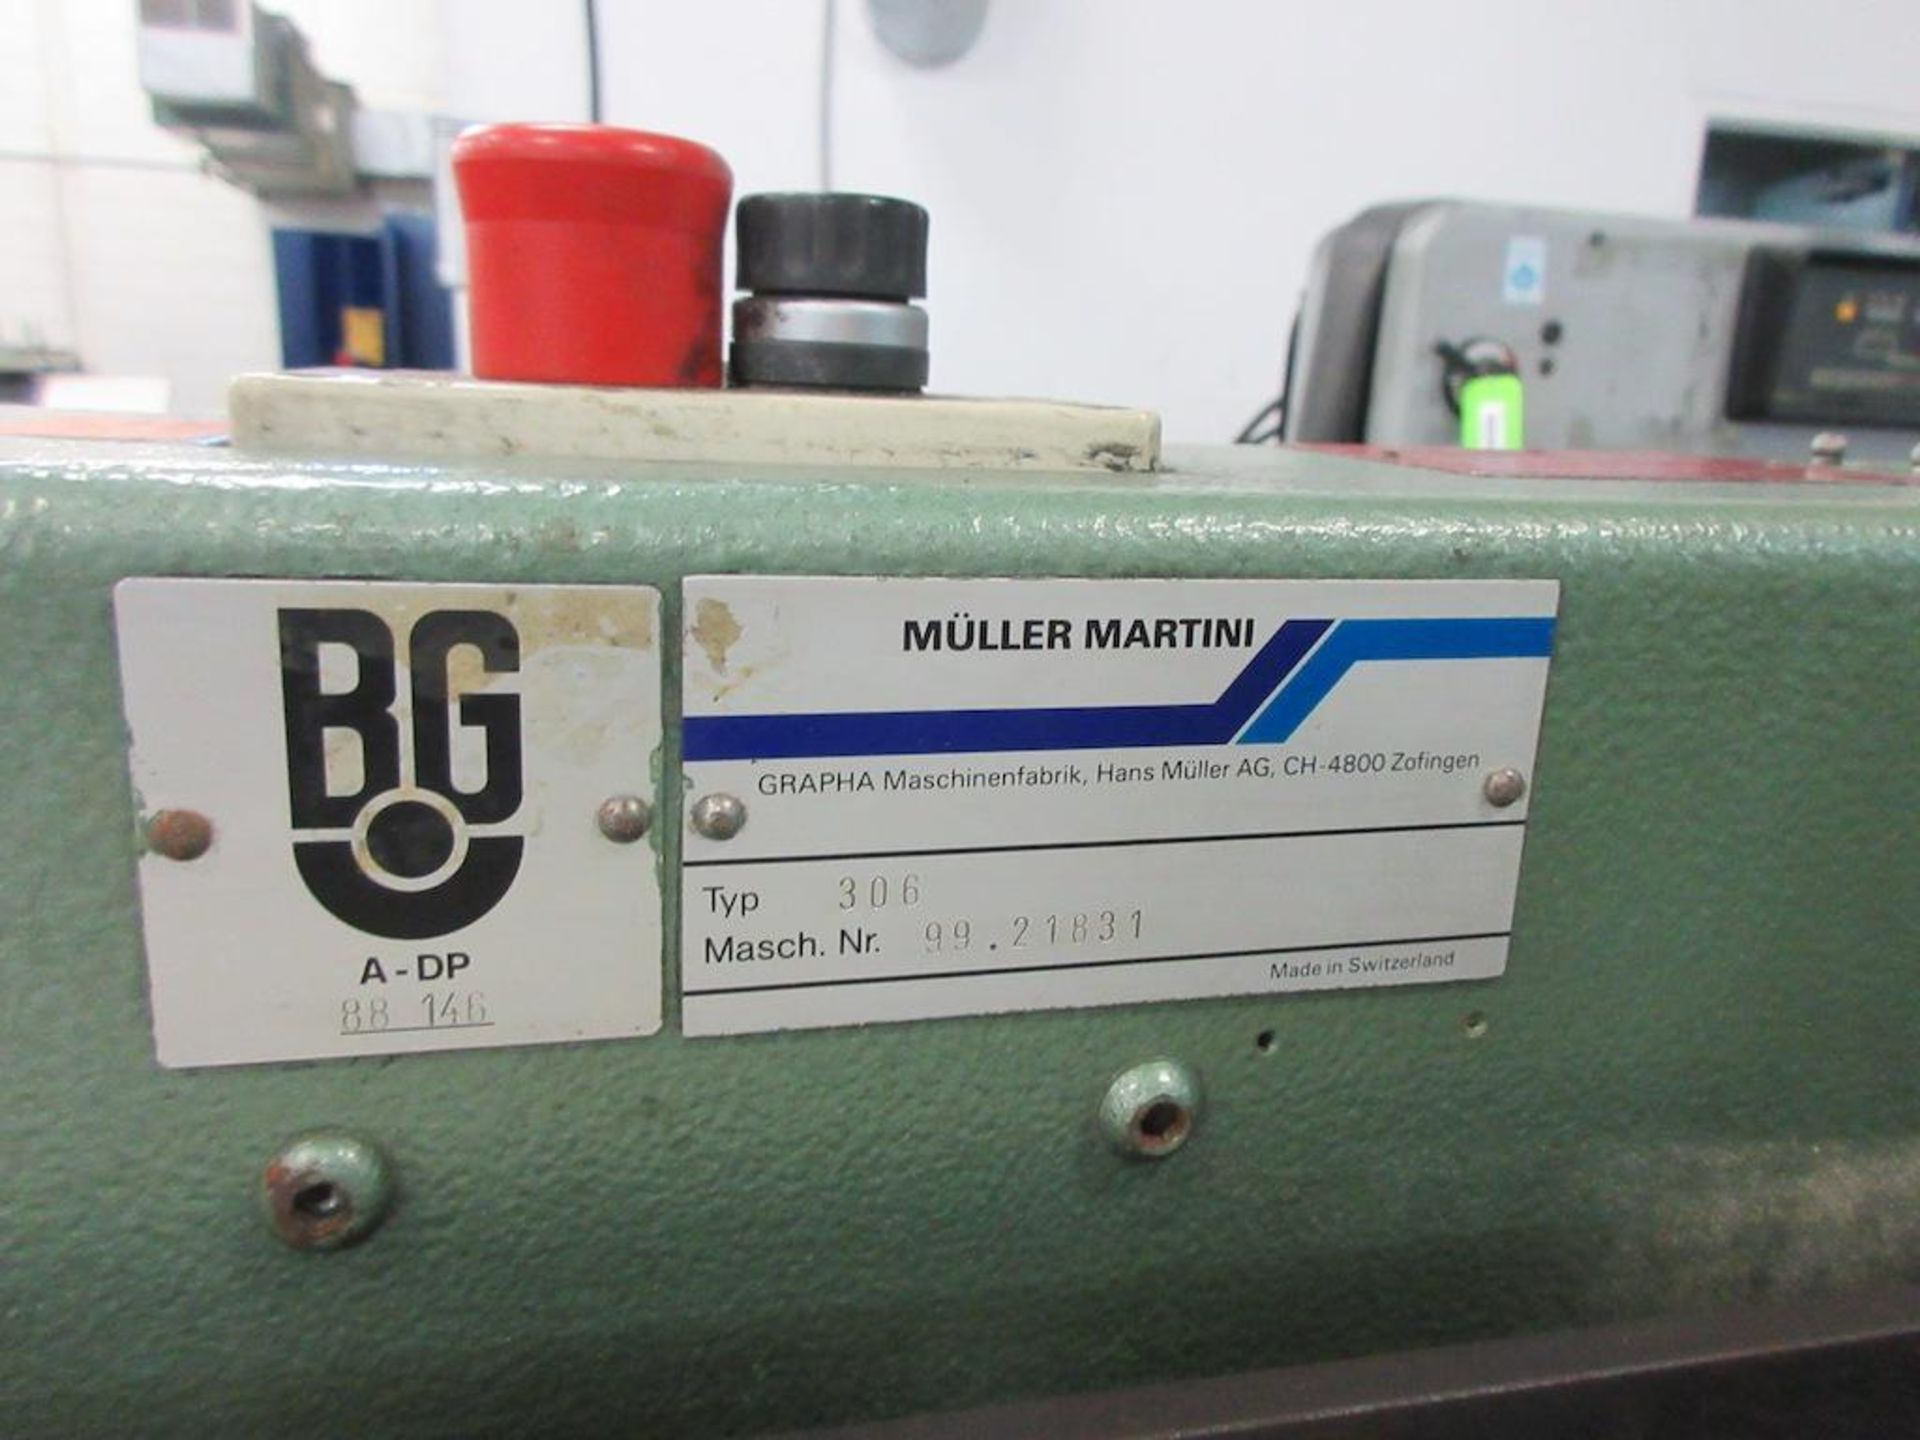 Muller 335 (6 Stations + Cover Feeder) includes Muller Stacker Muller 6 Stations: Type 306, sn 99.31 - Image 7 of 30